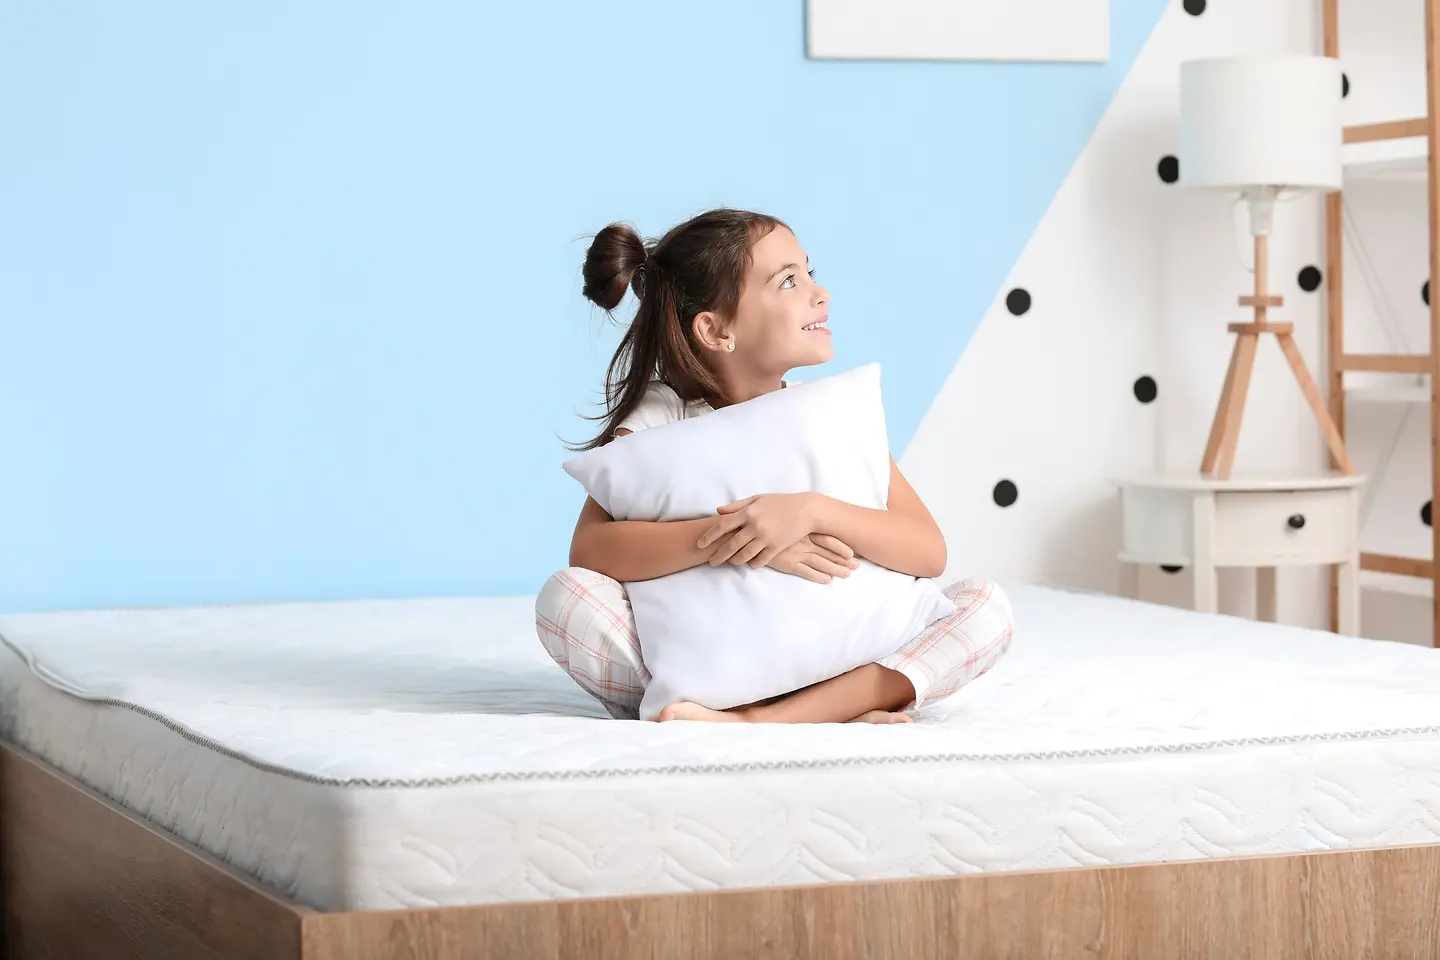 
Henkel Adhesive Technologies will be exhibiting at Interzum and demonstrating its expertise in the mattress sector, showcasing its latest innovations and solutions.